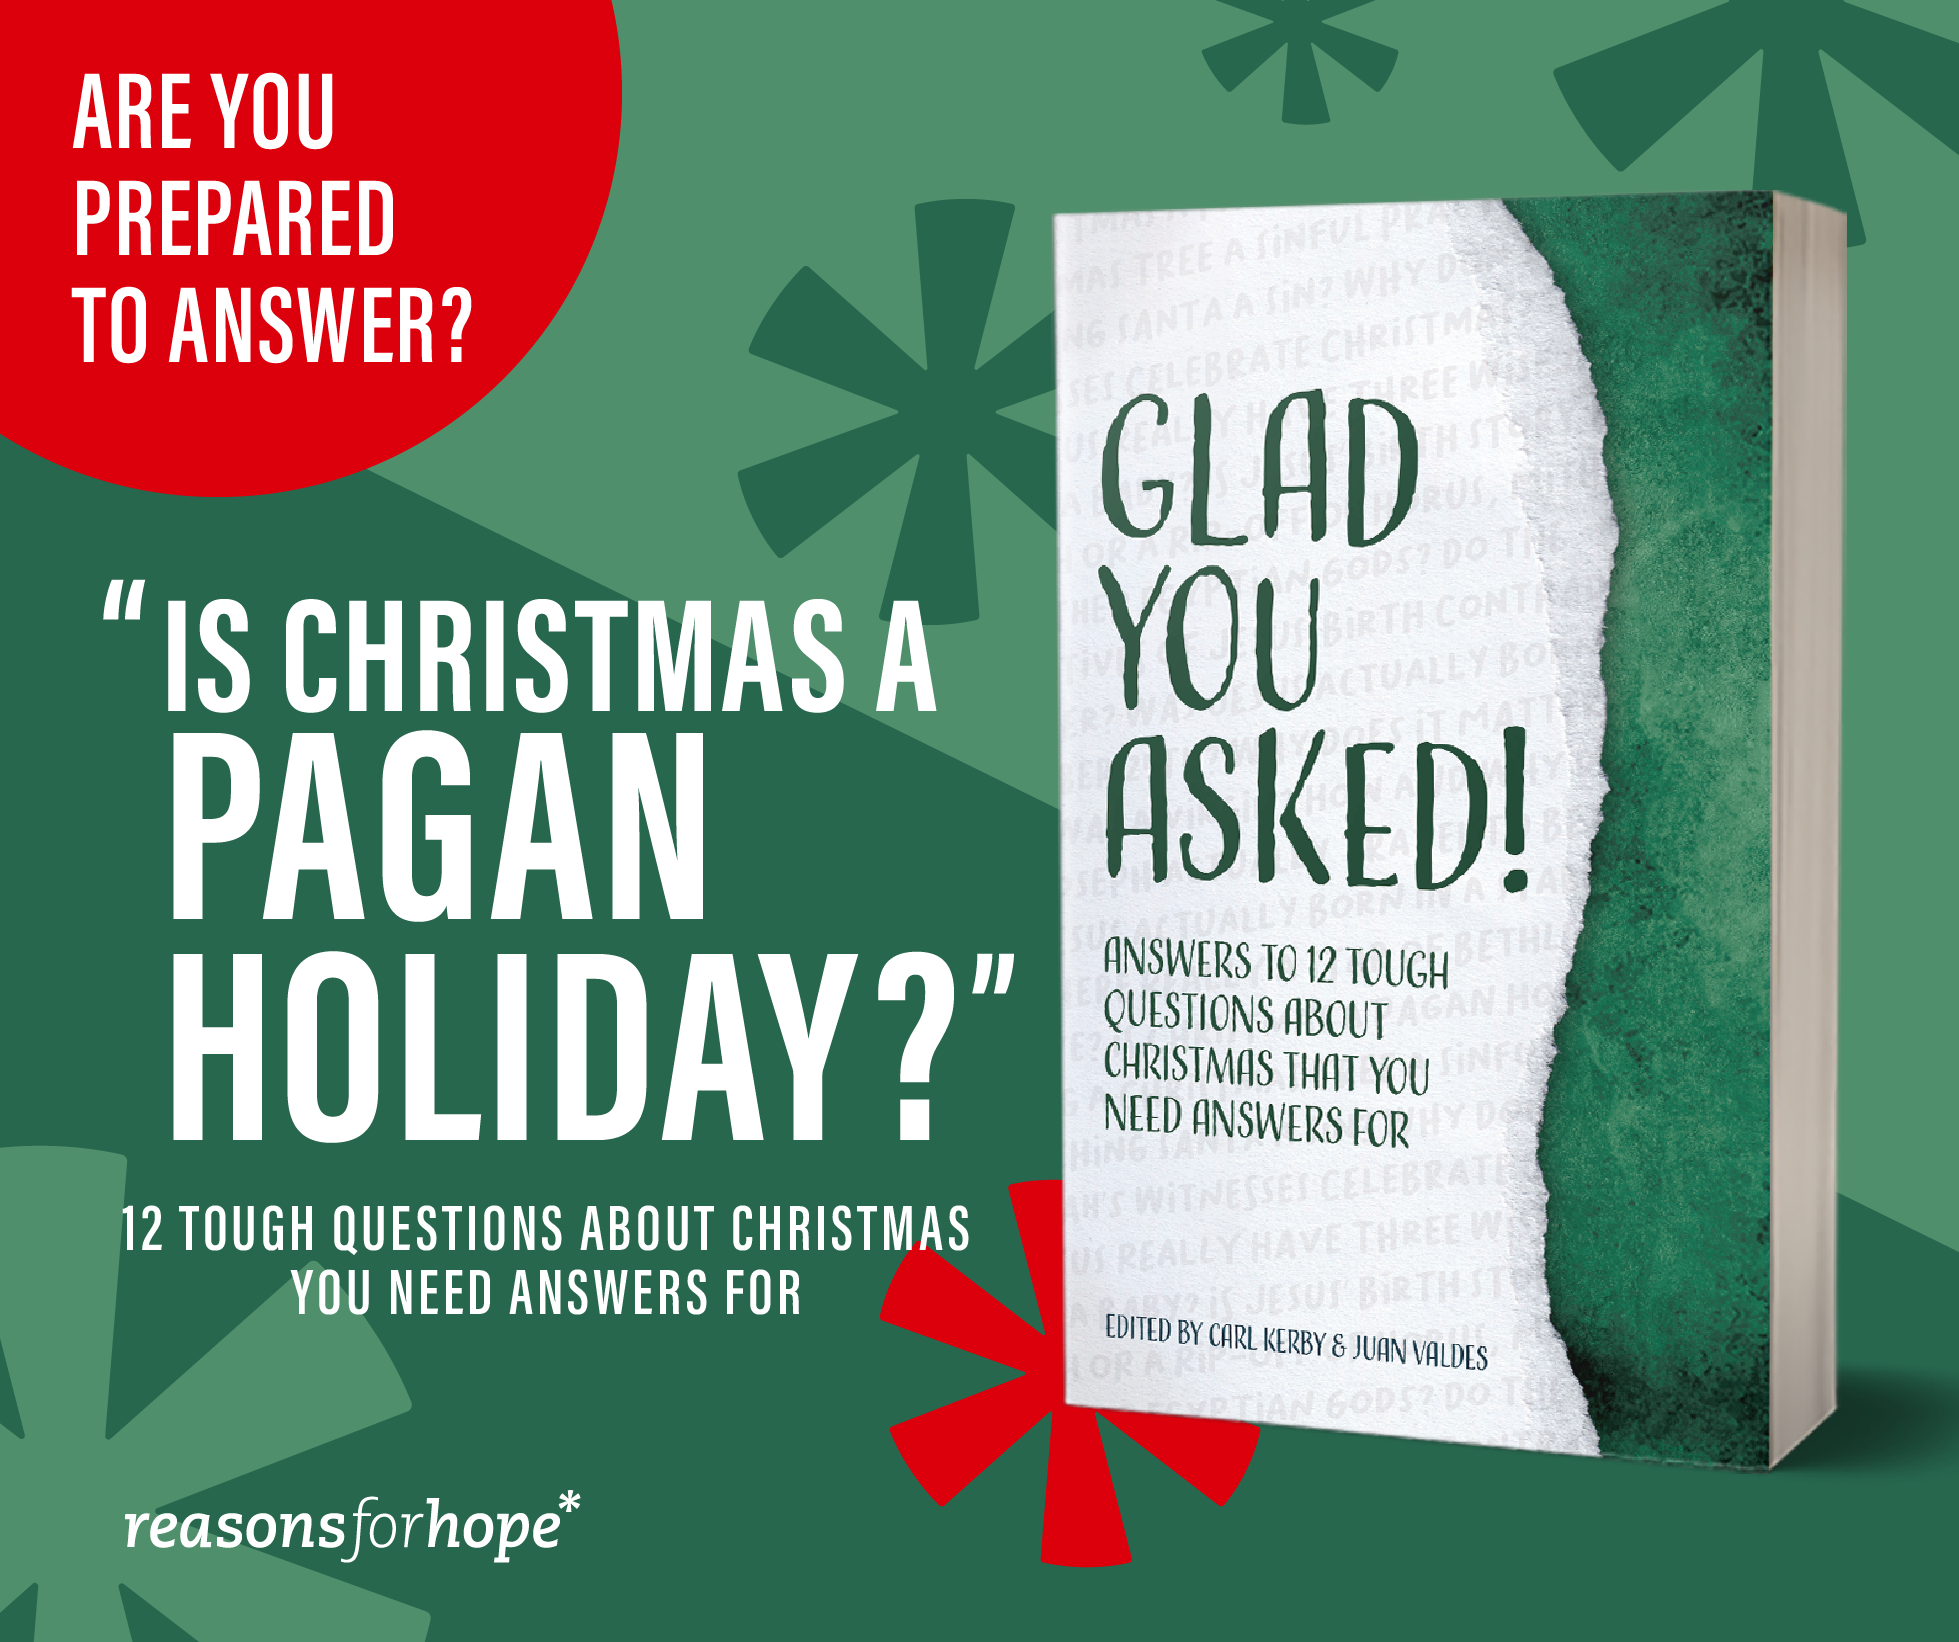 GLAD YOU ASKED: ANSWERS TO 12 TOUGH QUESTIONS ABOUT CHRISTMAS YOU NEED ANSWERS FOR